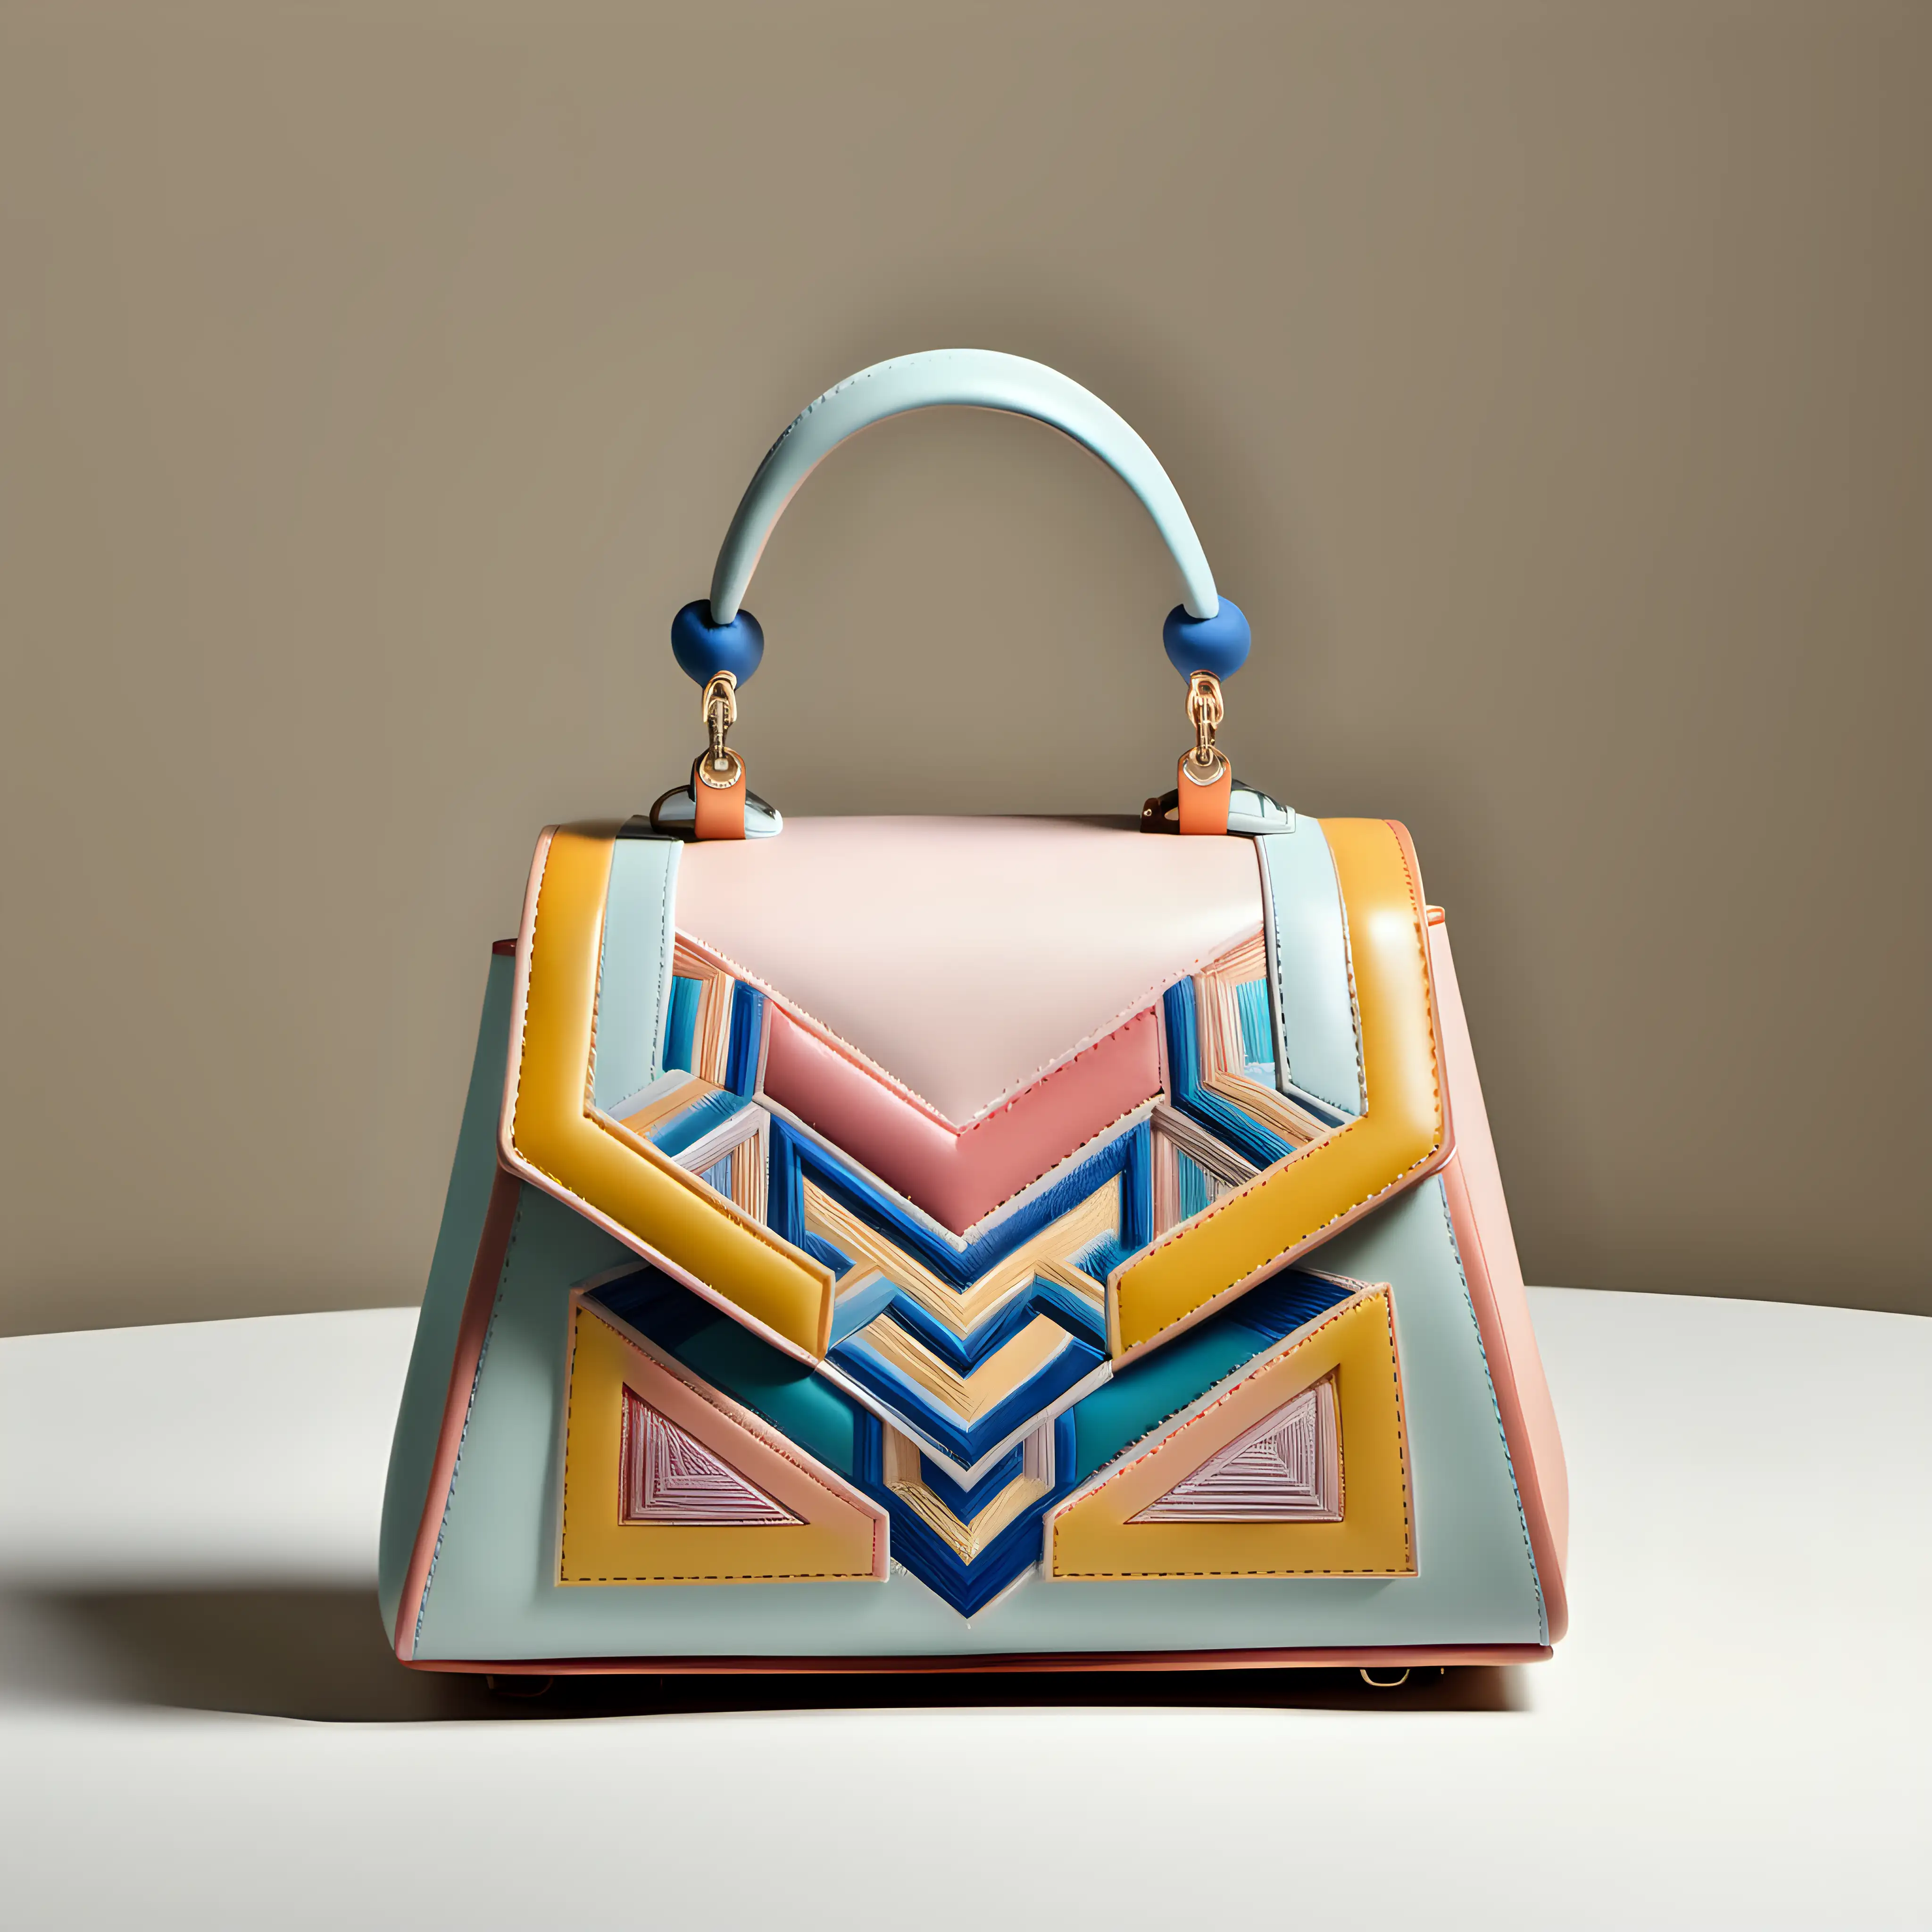 Elegant Frontal View of Mini Luxury Leather Bag with Embroidered Inserts and Geometric Design in Pastel Colors